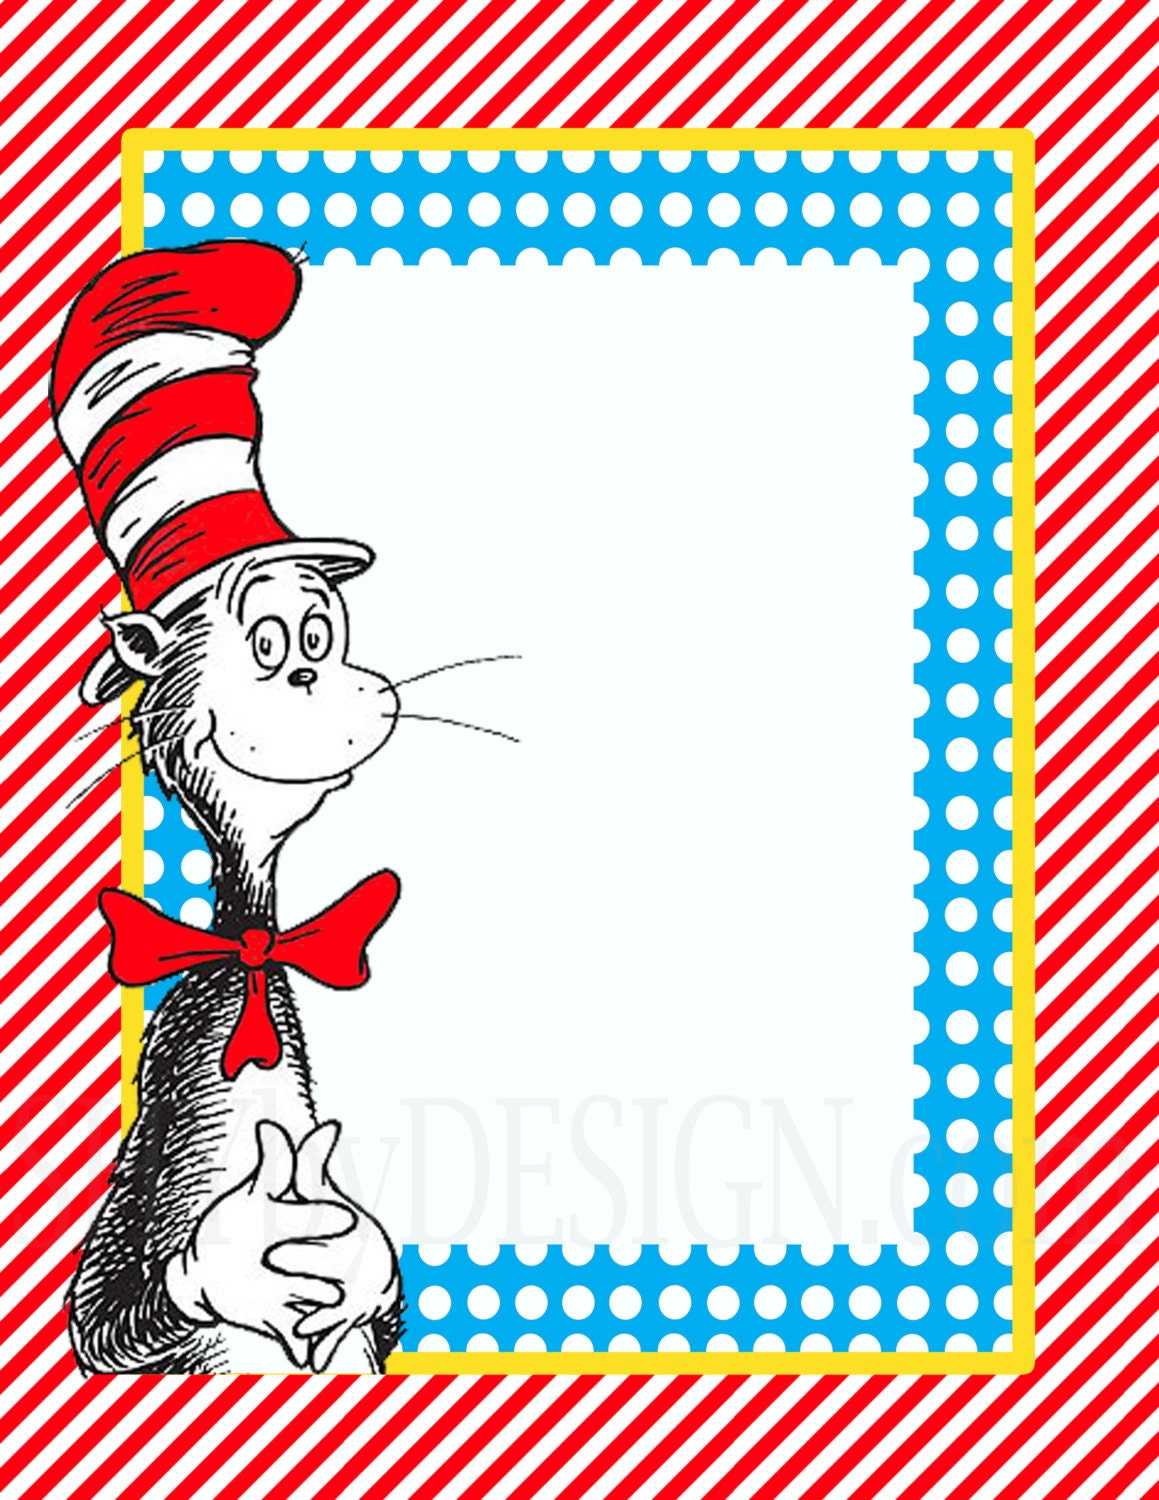 3 DIY Printable Dr Seuss Sign Templates By Shydesign On Etsy